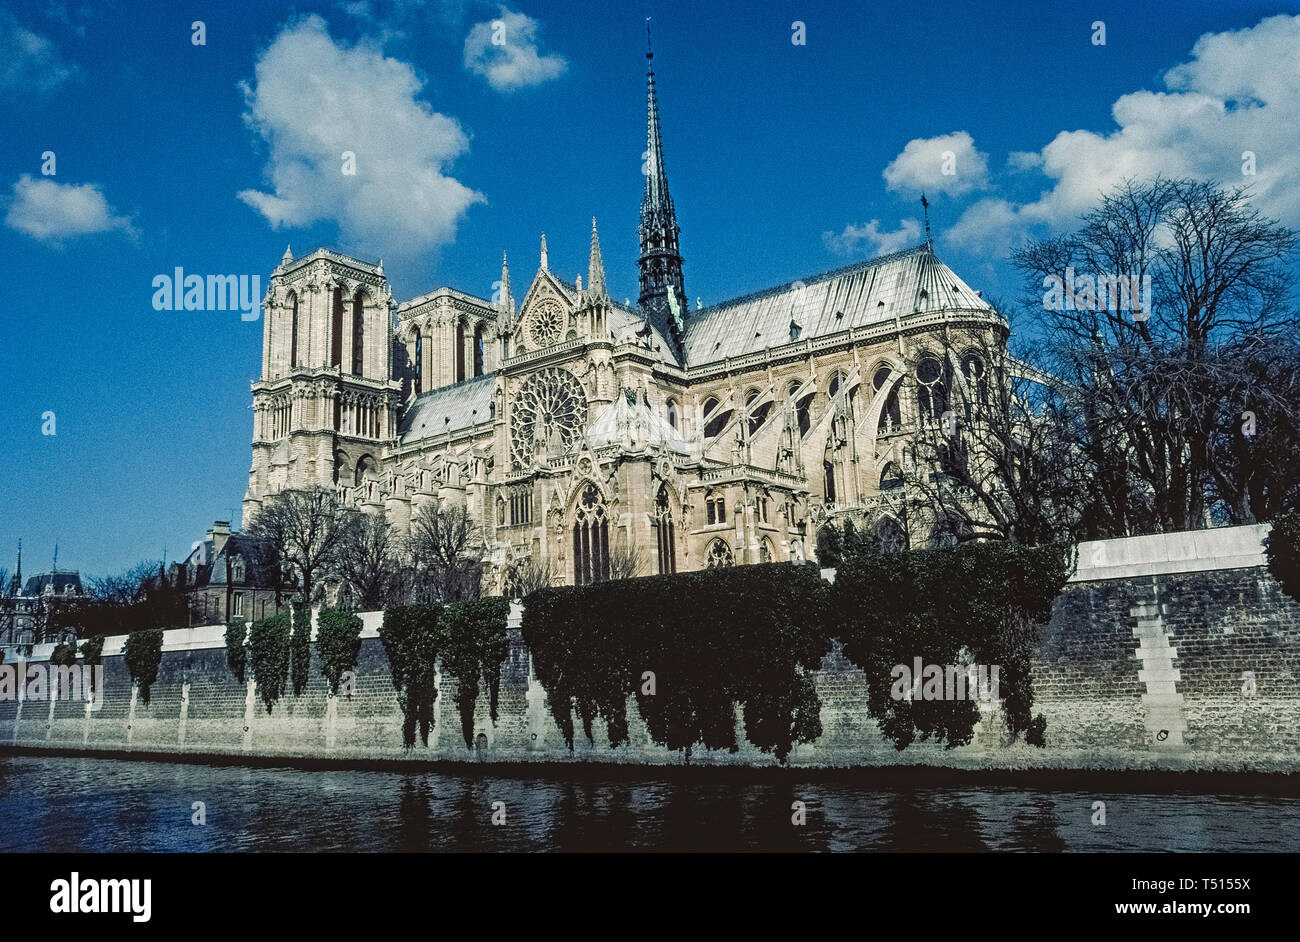 A view from the River Seine of the gothic Notre-Dame de Paris, the famous Catholic cathedral in the French capital that is one of Europe's most popular tourist attractions. This photograph was taken before the historic church suffered major damage by a disastrous fire in April, 2019, and was closed for restoration. Construction of the ancient stone structure began in the 12th Century and featured ornate medieval architecture that included twin bell towers, stained-glass rose windows, flying support buttresses and the soaring wooden central spire (that was destroyed in the fire). Stock Photo